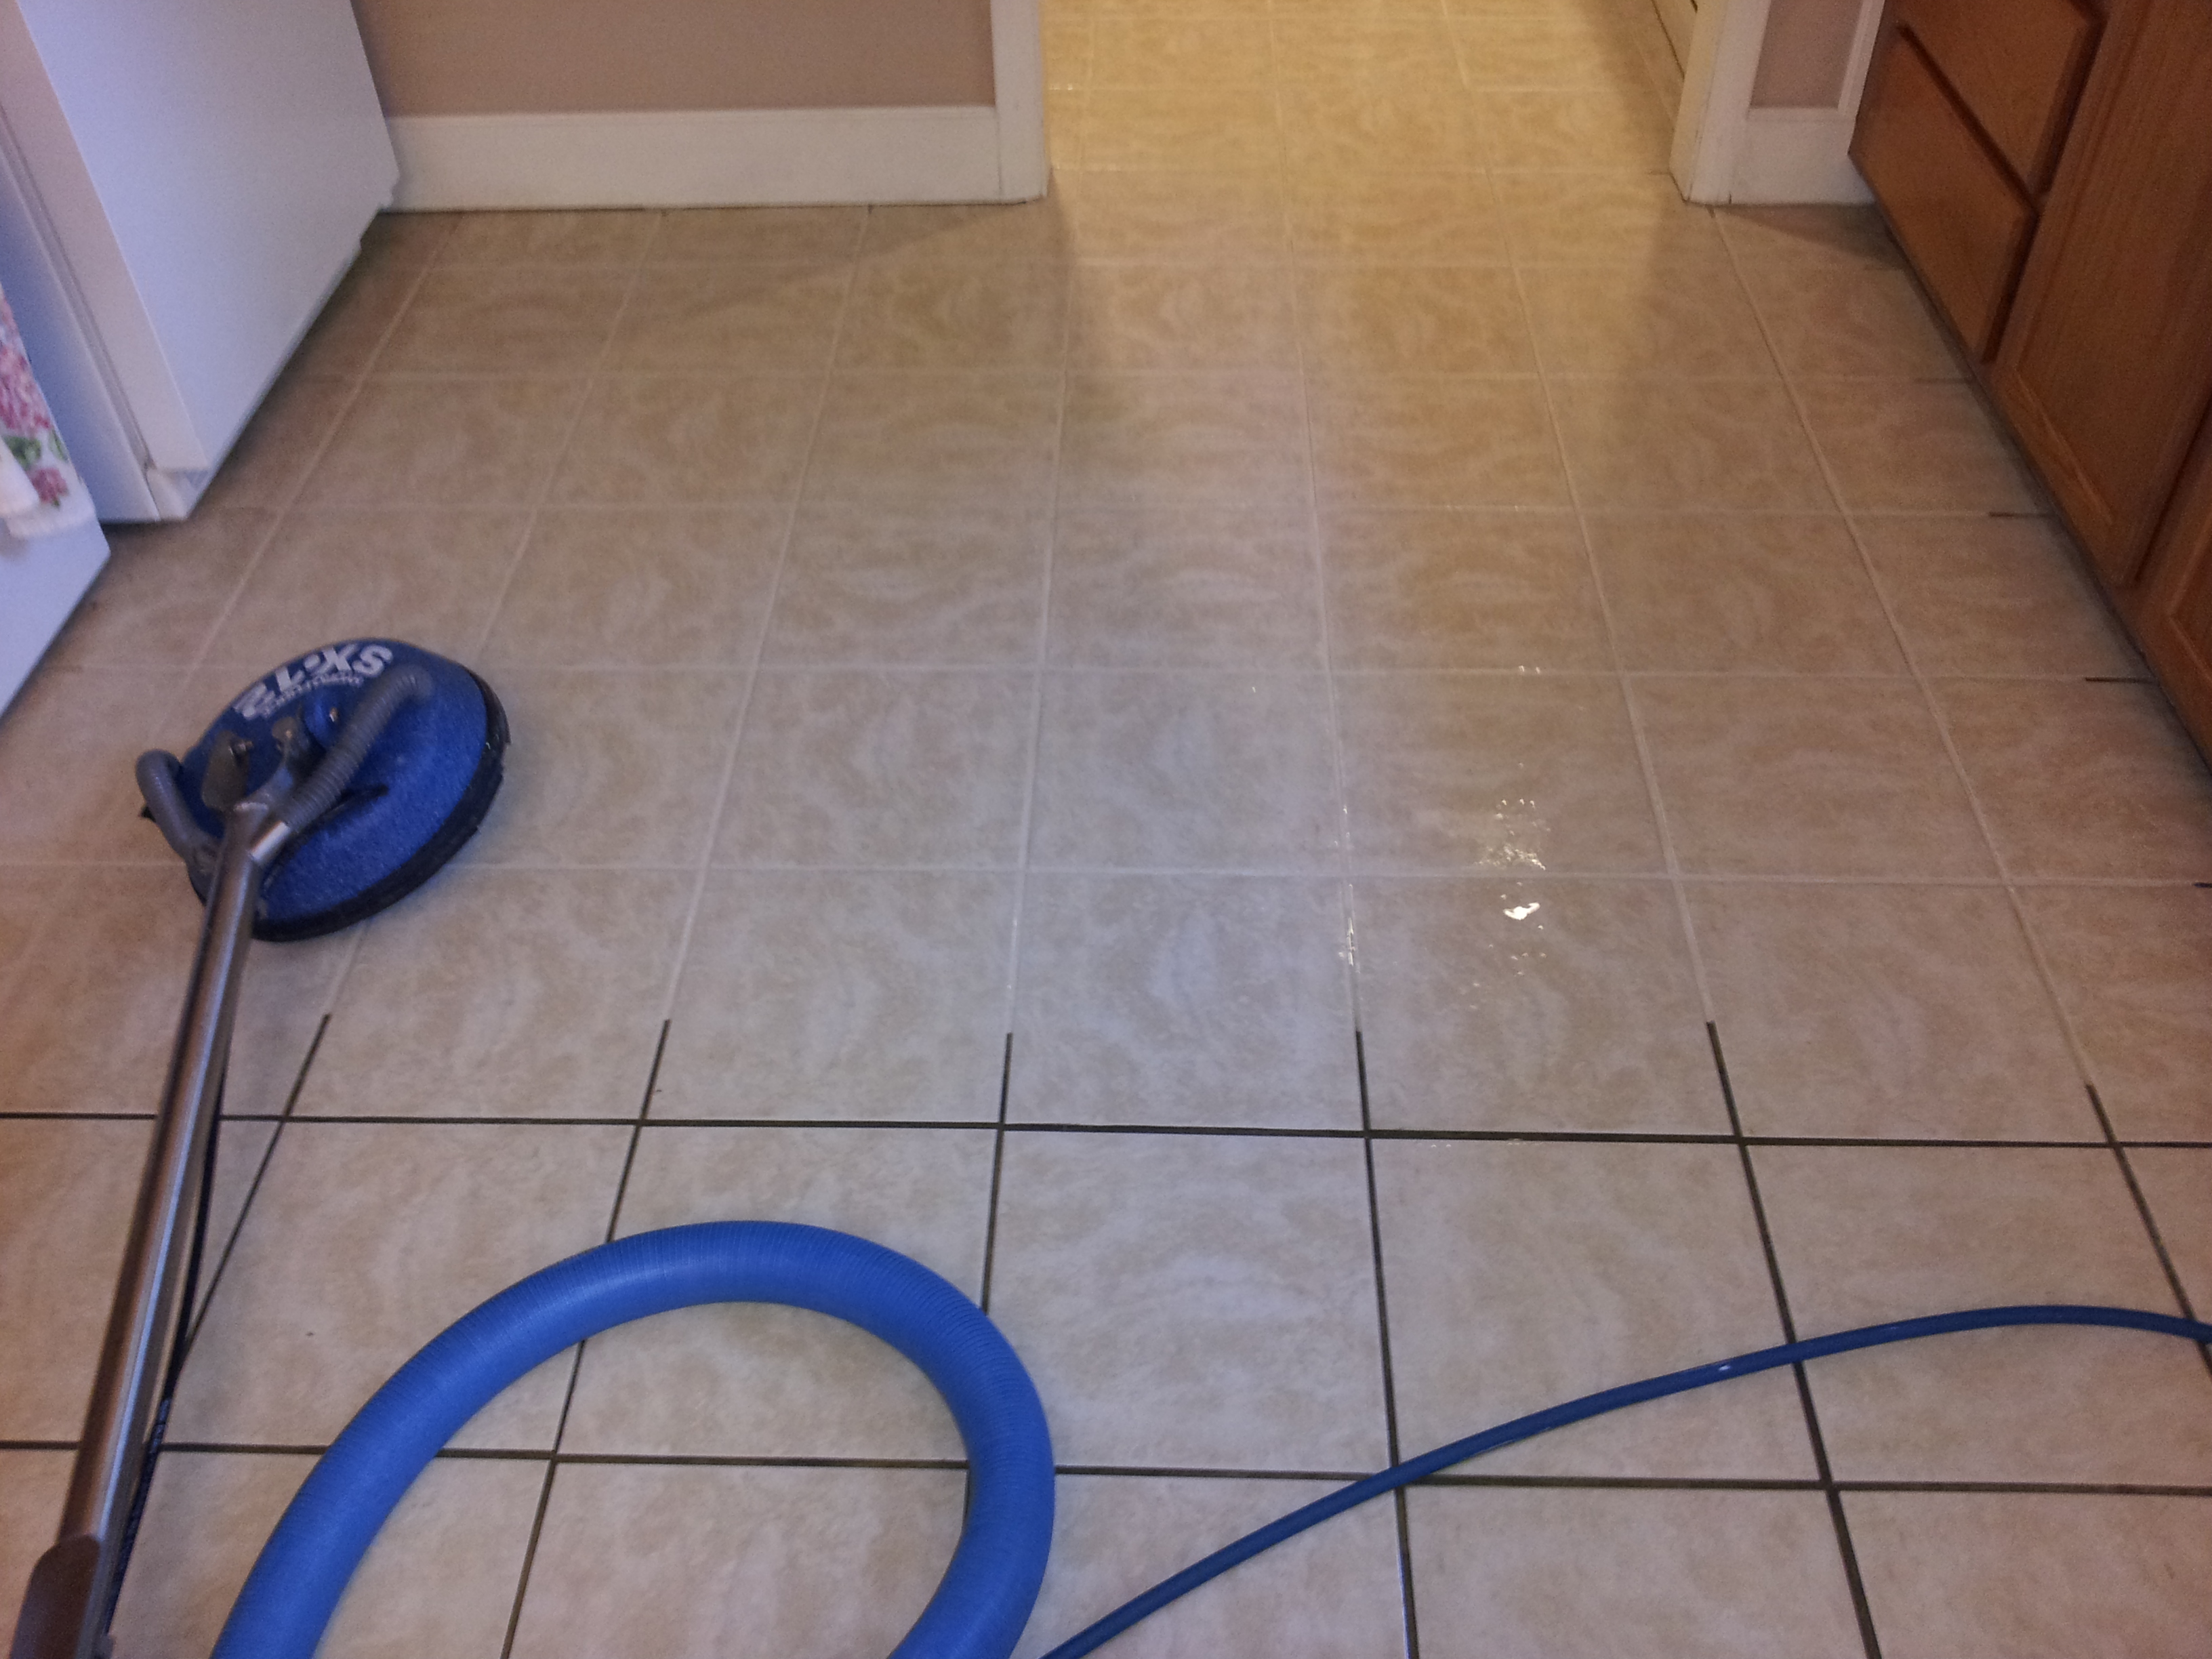 The Ultimate Tile & Grout Cleaning Hacks You Can Use At Home - WanderGlobe